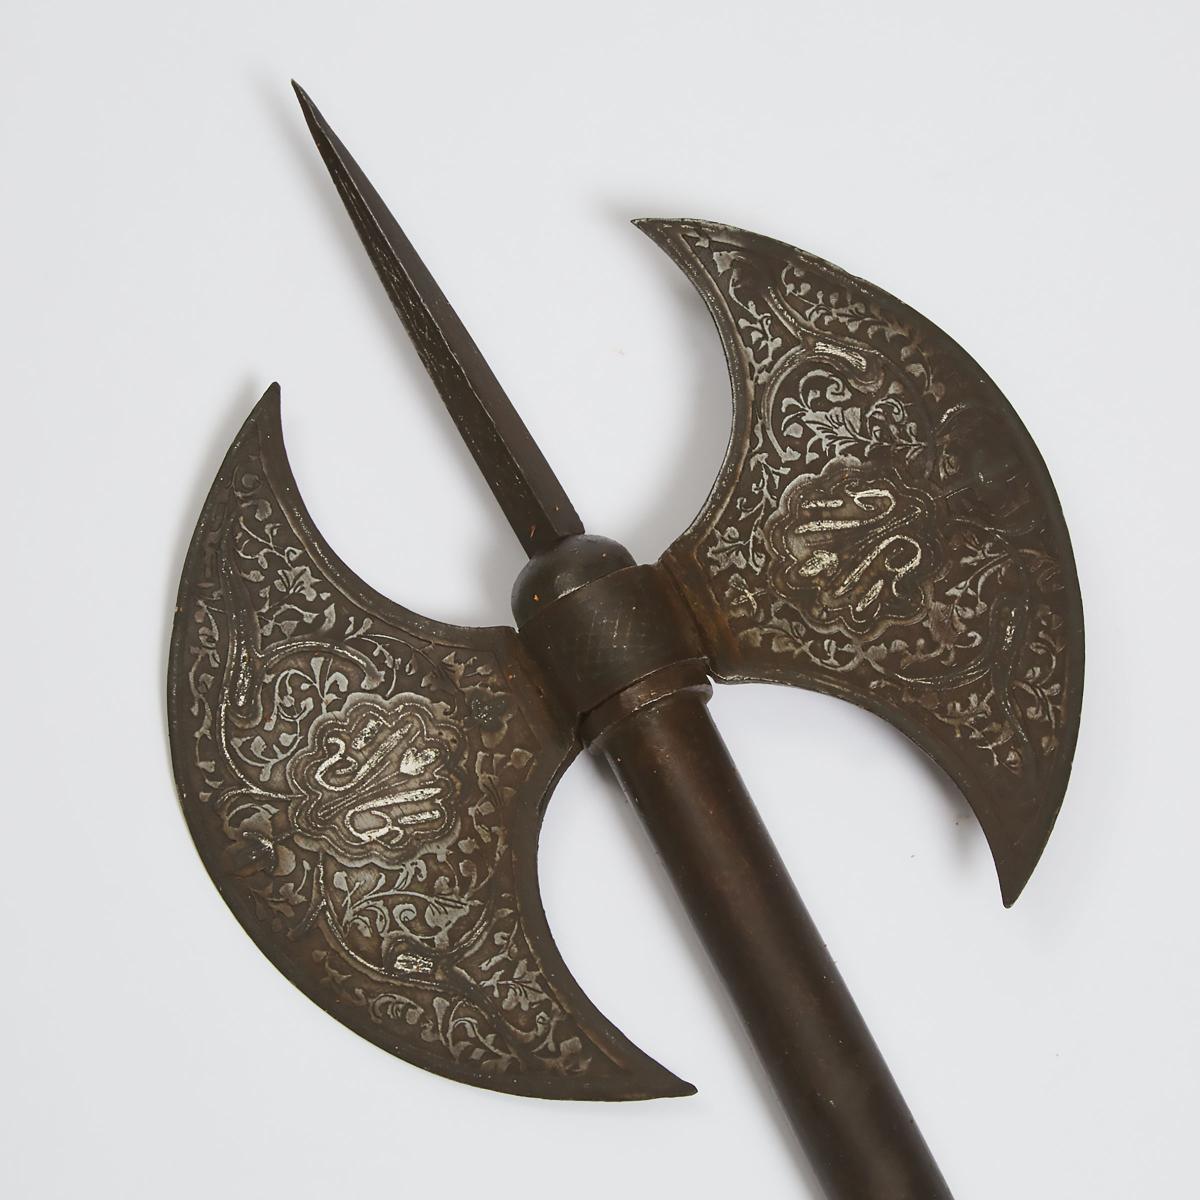 Indo-Persian Silver Damascened Double Headed Processional Tabar (Battle Axe), 19th century - Image 3 of 3